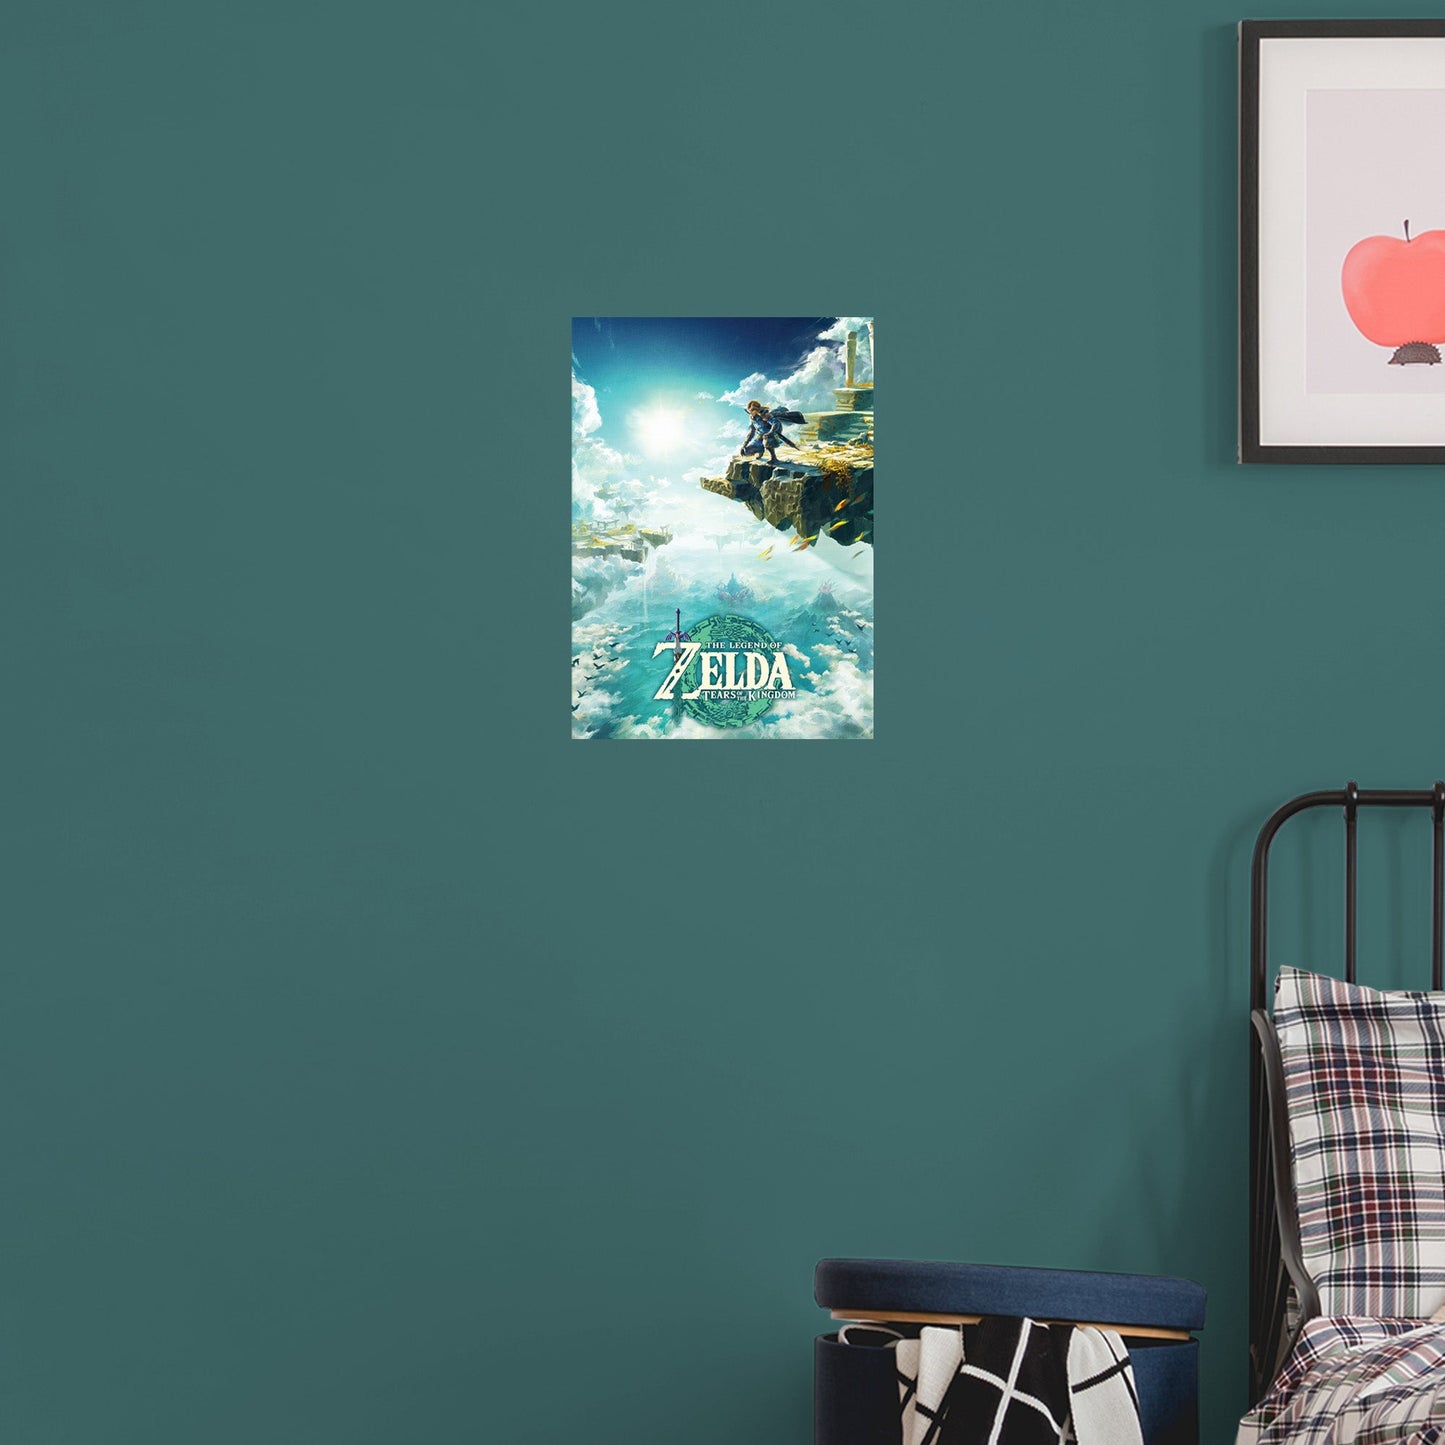 Zelda: Tears of the Kingdom: Link Poster        - Officially Licensed Nintendo Removable     Adhesive Decal